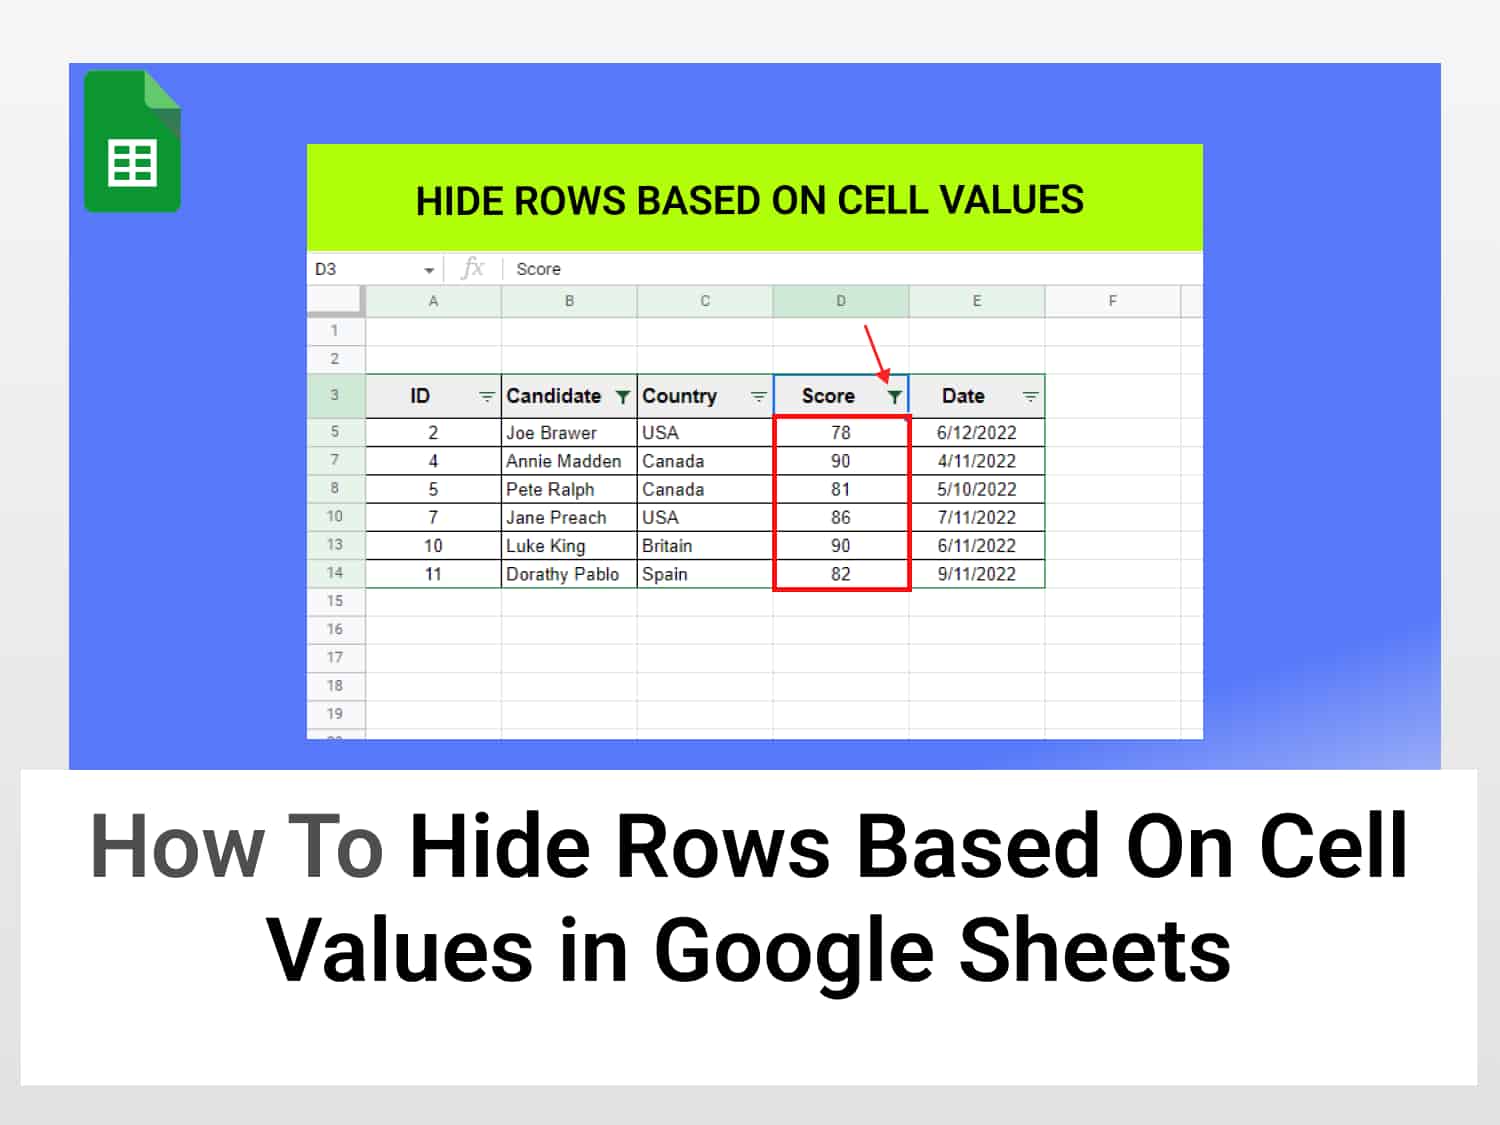 How to hide rows based on cell values in Google Sheets